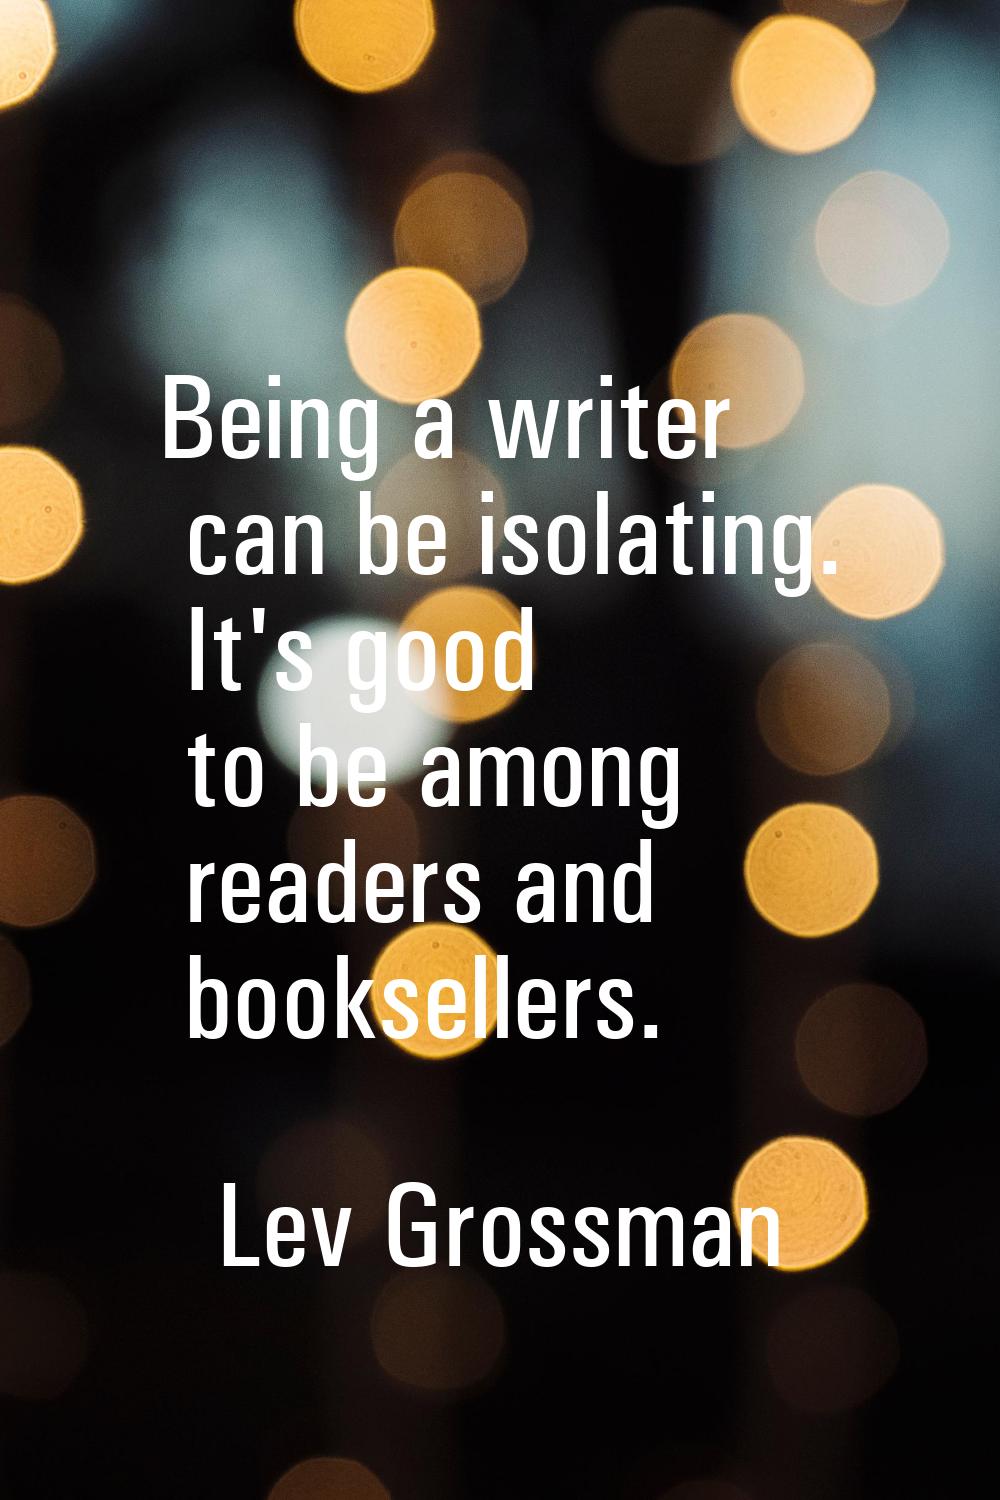 Being a writer can be isolating. It's good to be among readers and booksellers.